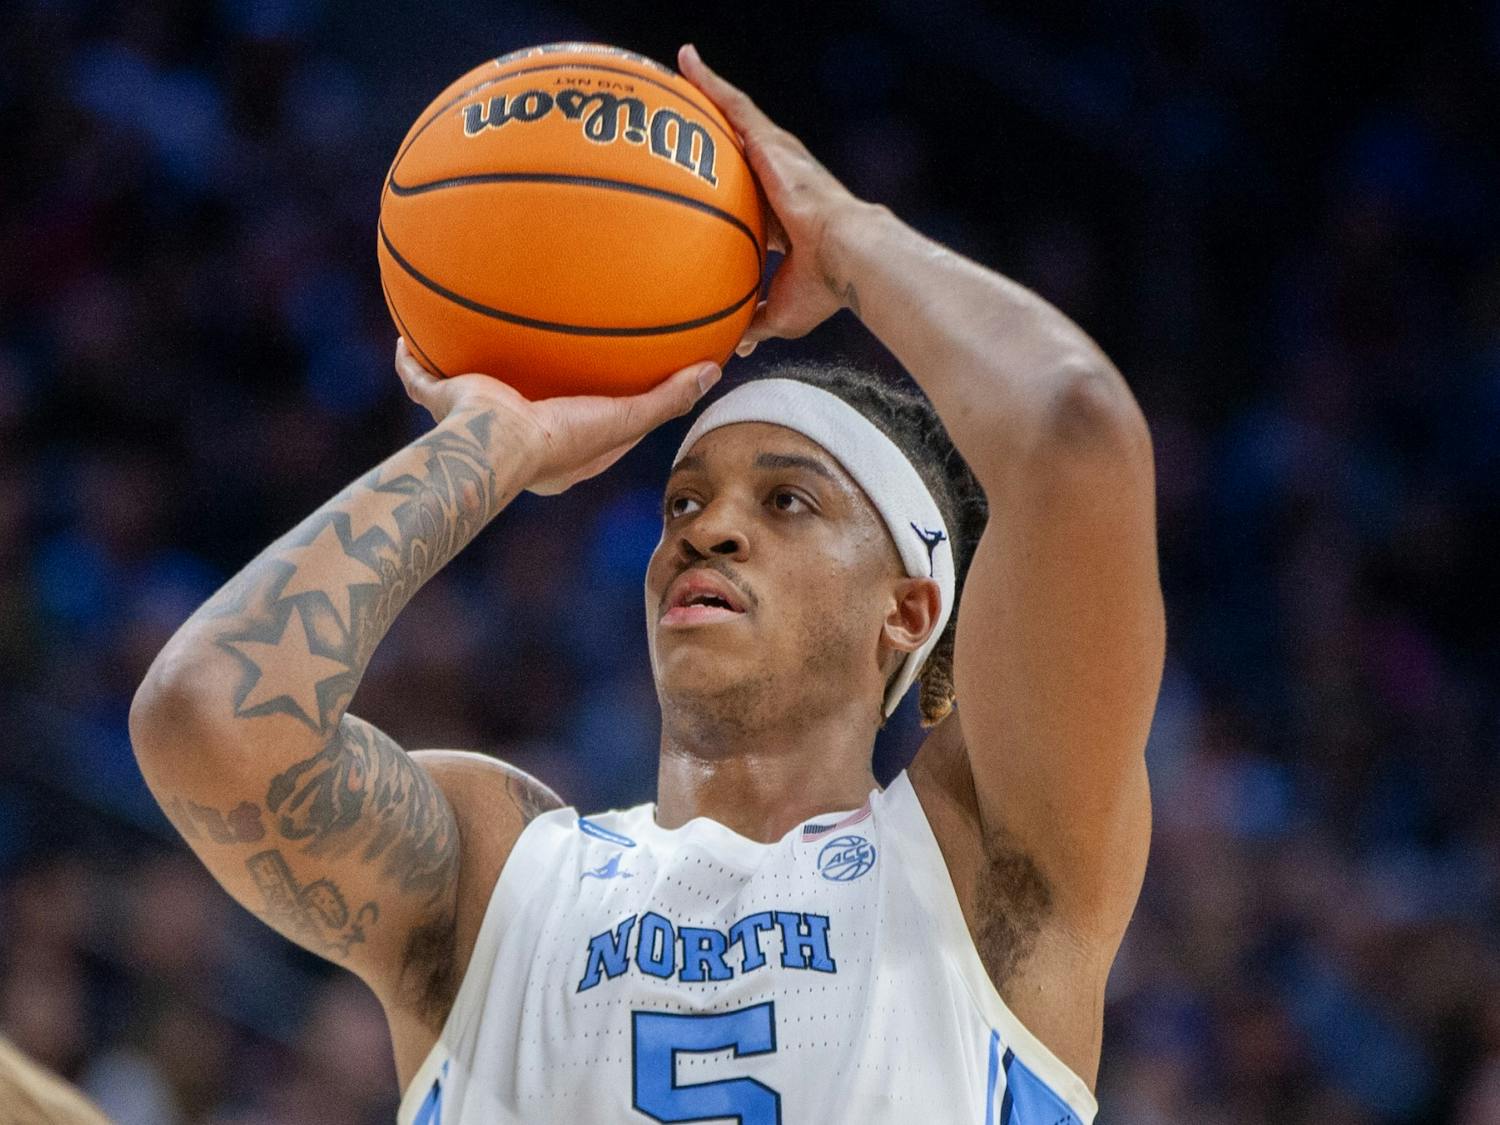 Junior forward Armando Bacot (5) throws a free throw at the Elite 8 game of the NCAA tournament against St. Peter's at the Wells Fargo Center in Philadelphia. UNC won 69-49 and is advancing to the Final Four. &nbsp;&nbsp;